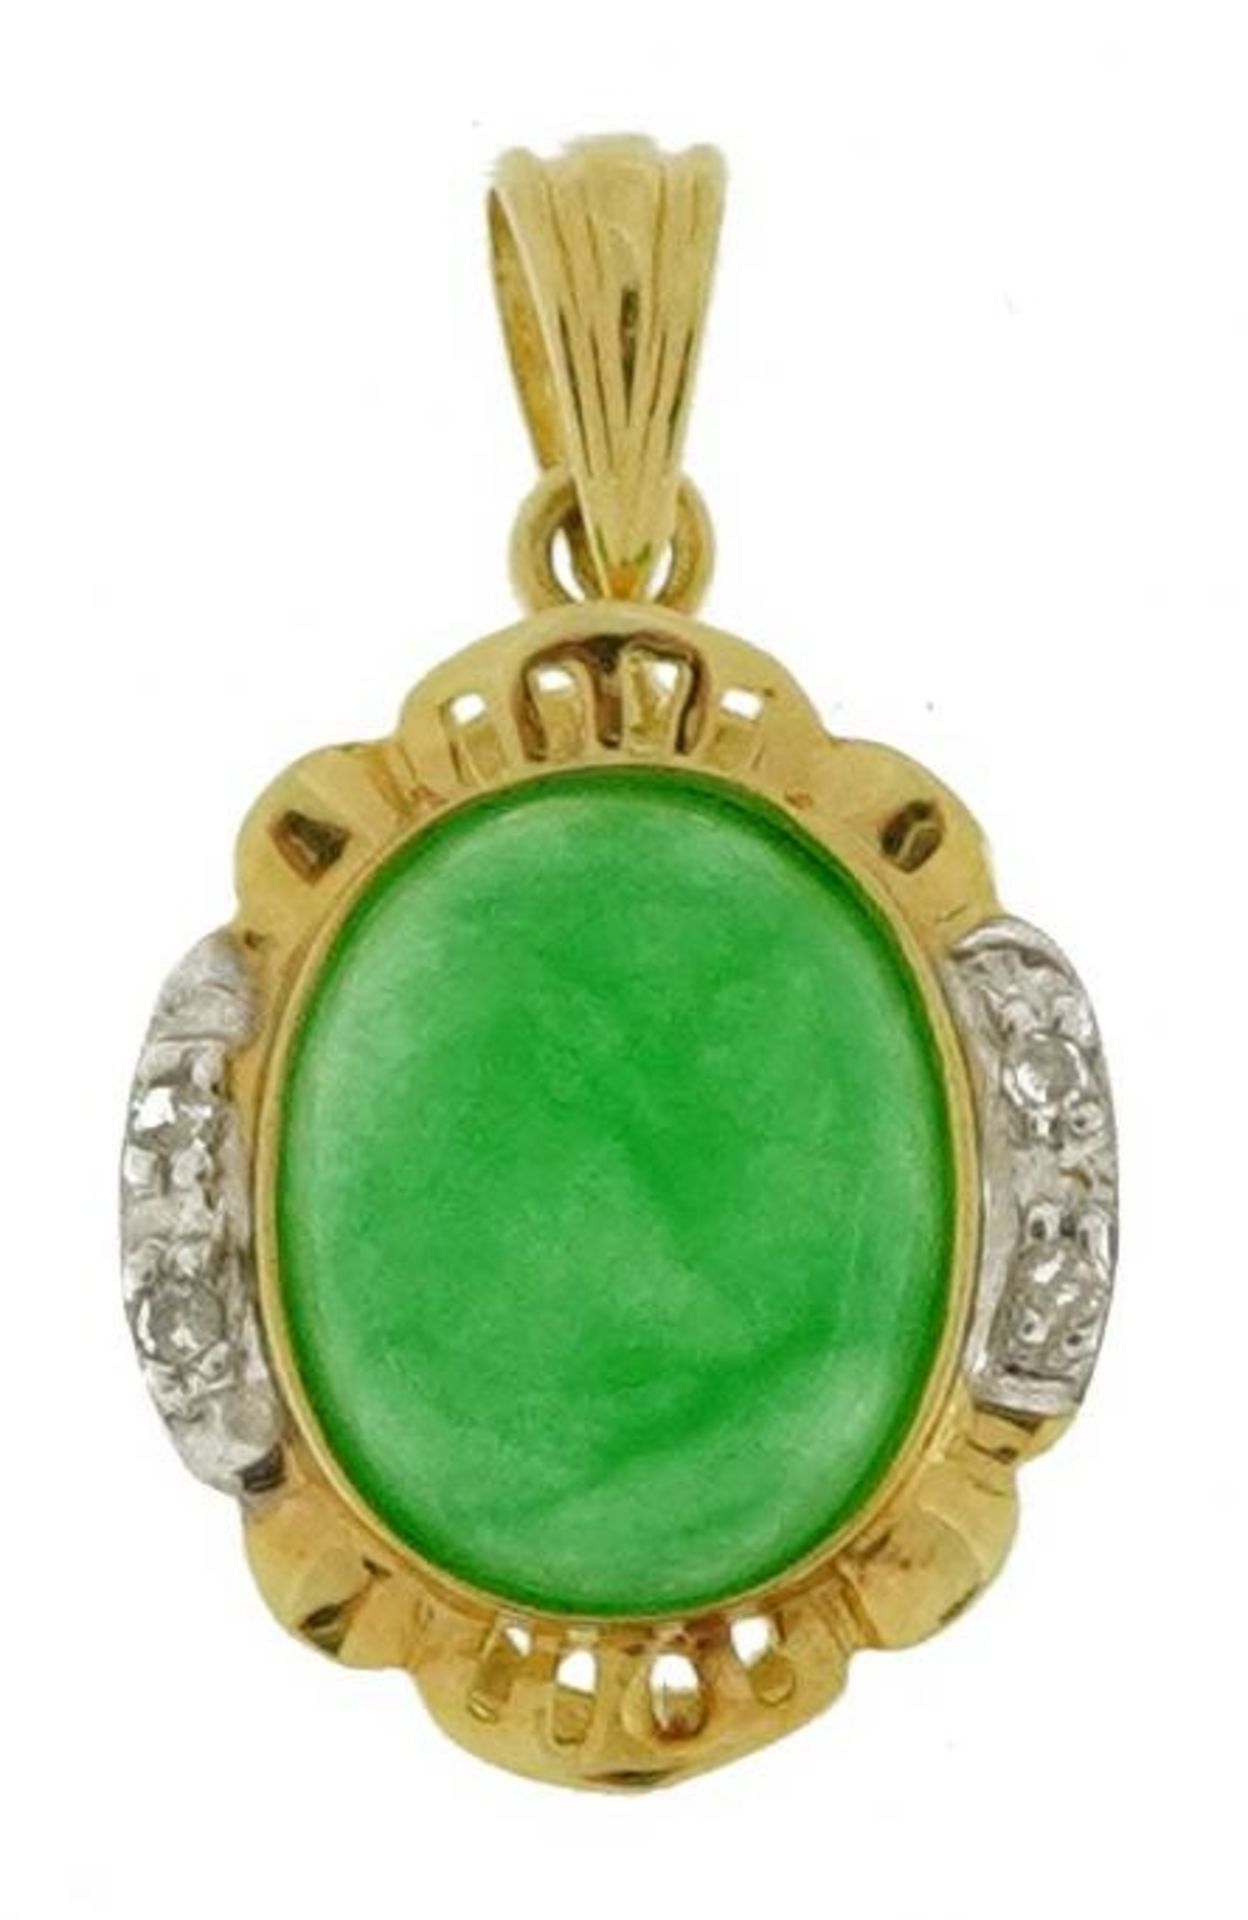 Chinese 14k gold cabochon jade and diamond pendant, 2.2cm high, 1.6g